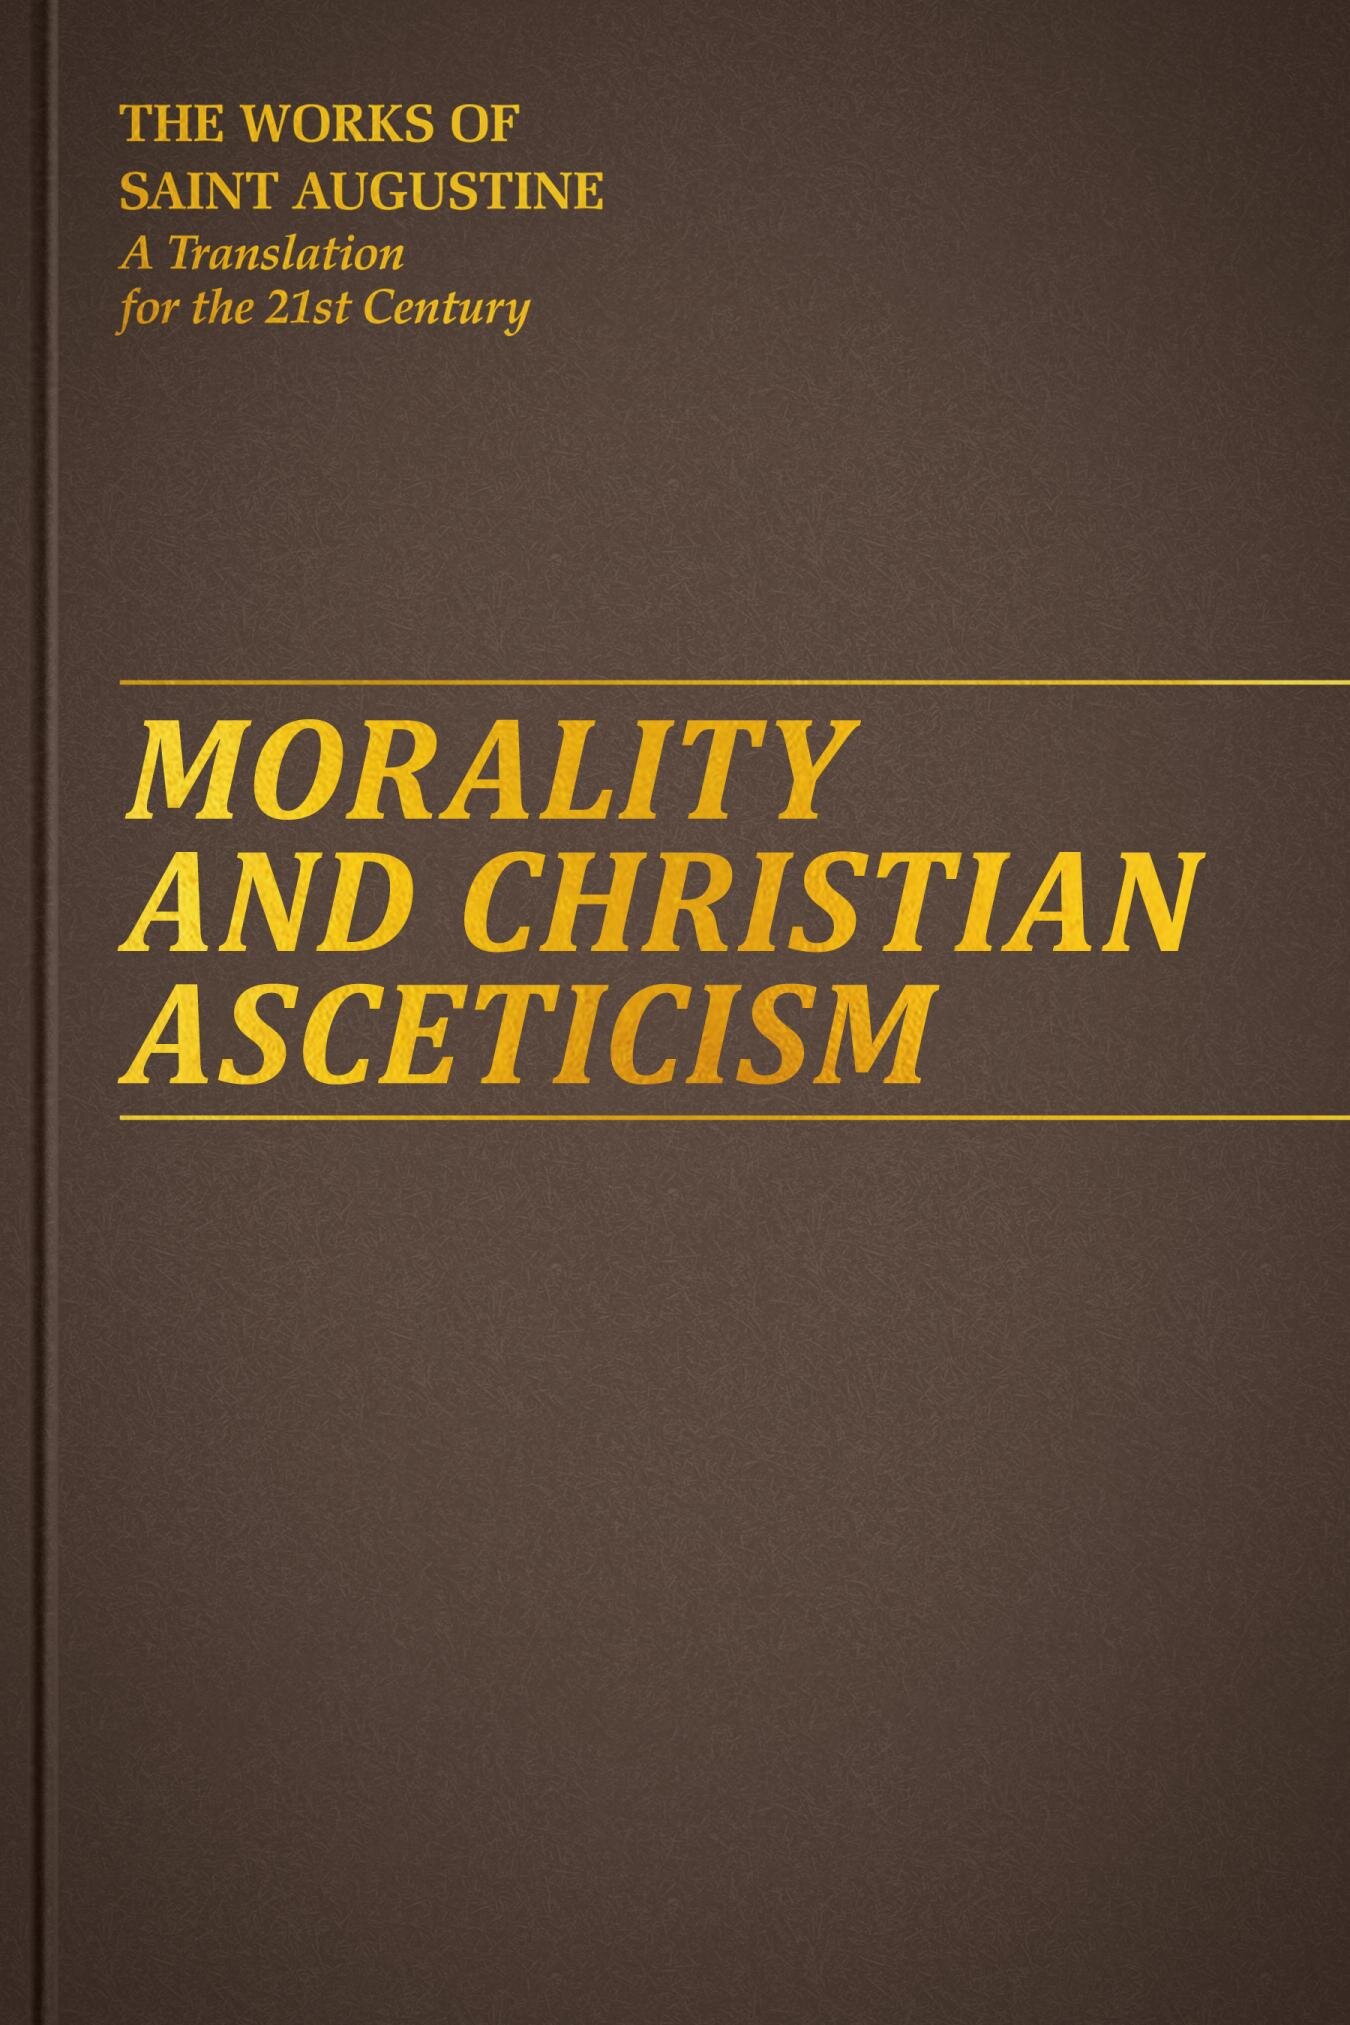 Morality and Christian Asceticism (The Works of Saint Augustine: A Translation for the 21st Century)